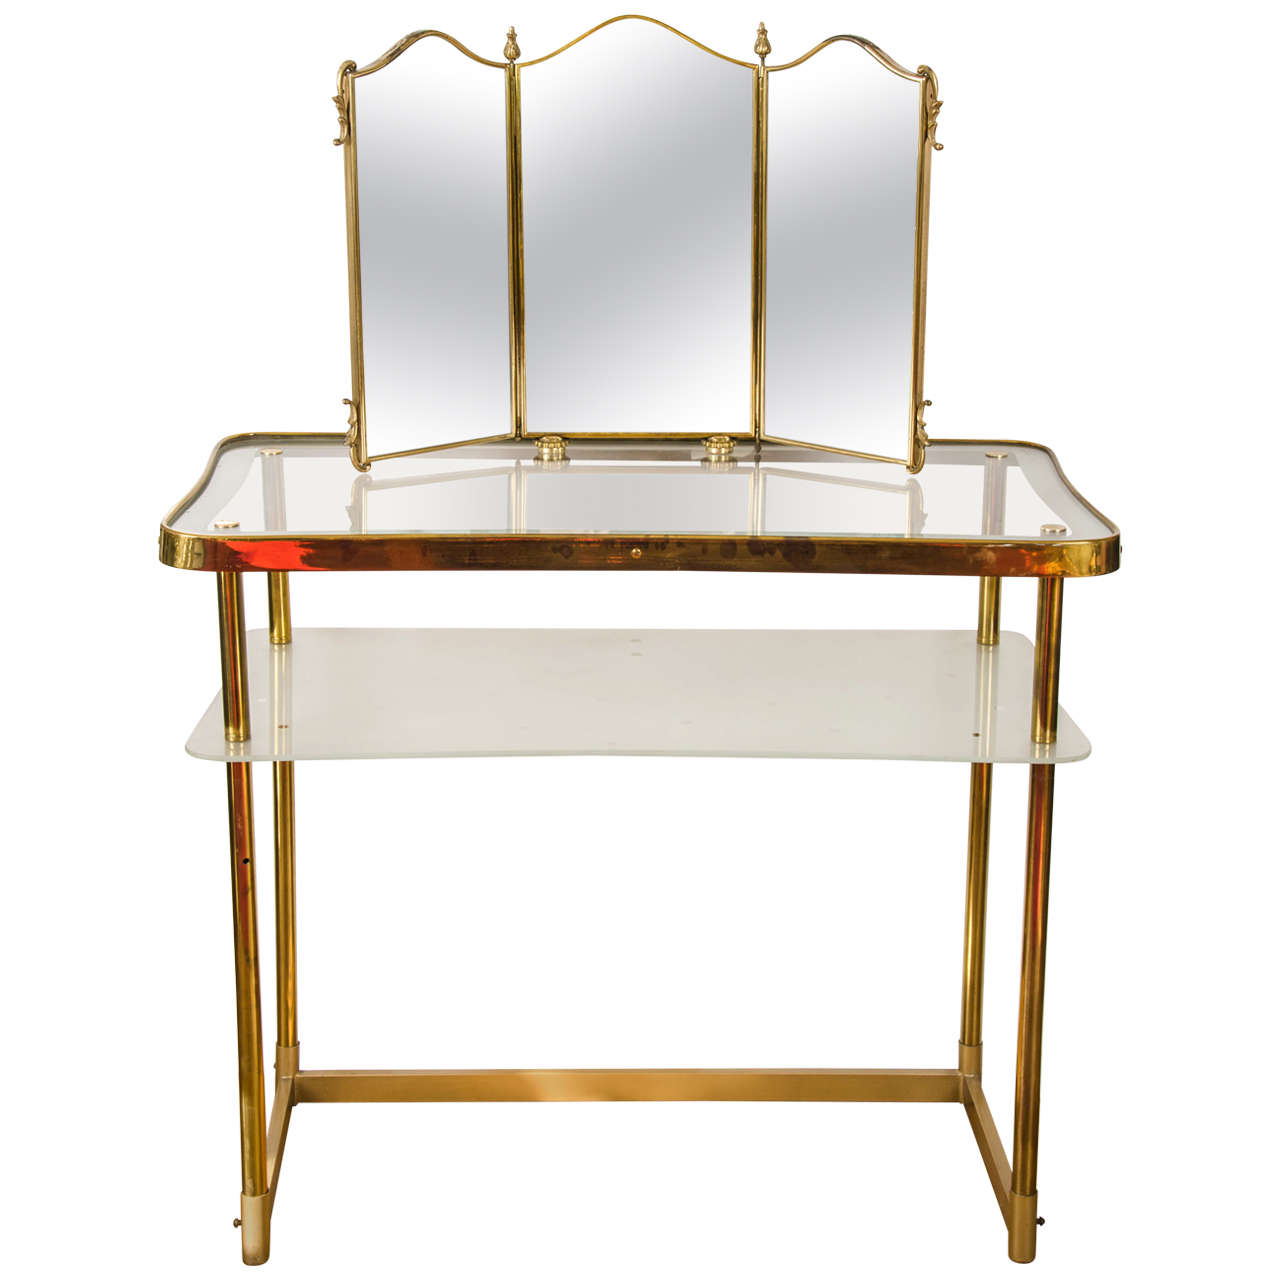 1950s "Polka Dot" Dressing Table with Triptych Mirror